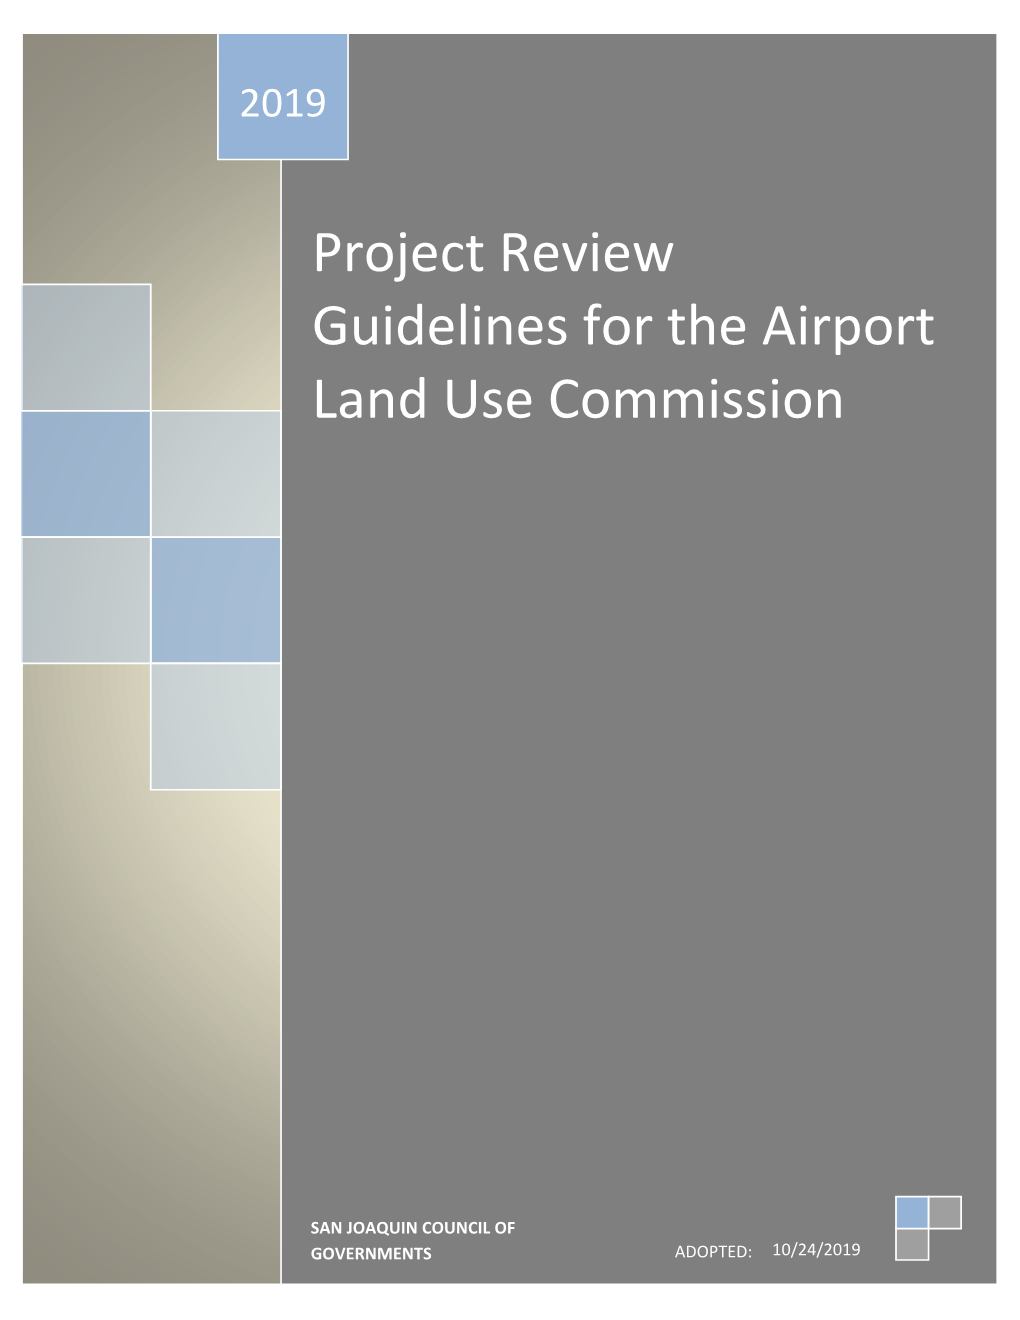 Project Review Guidelines for the Airport Land Use Commission